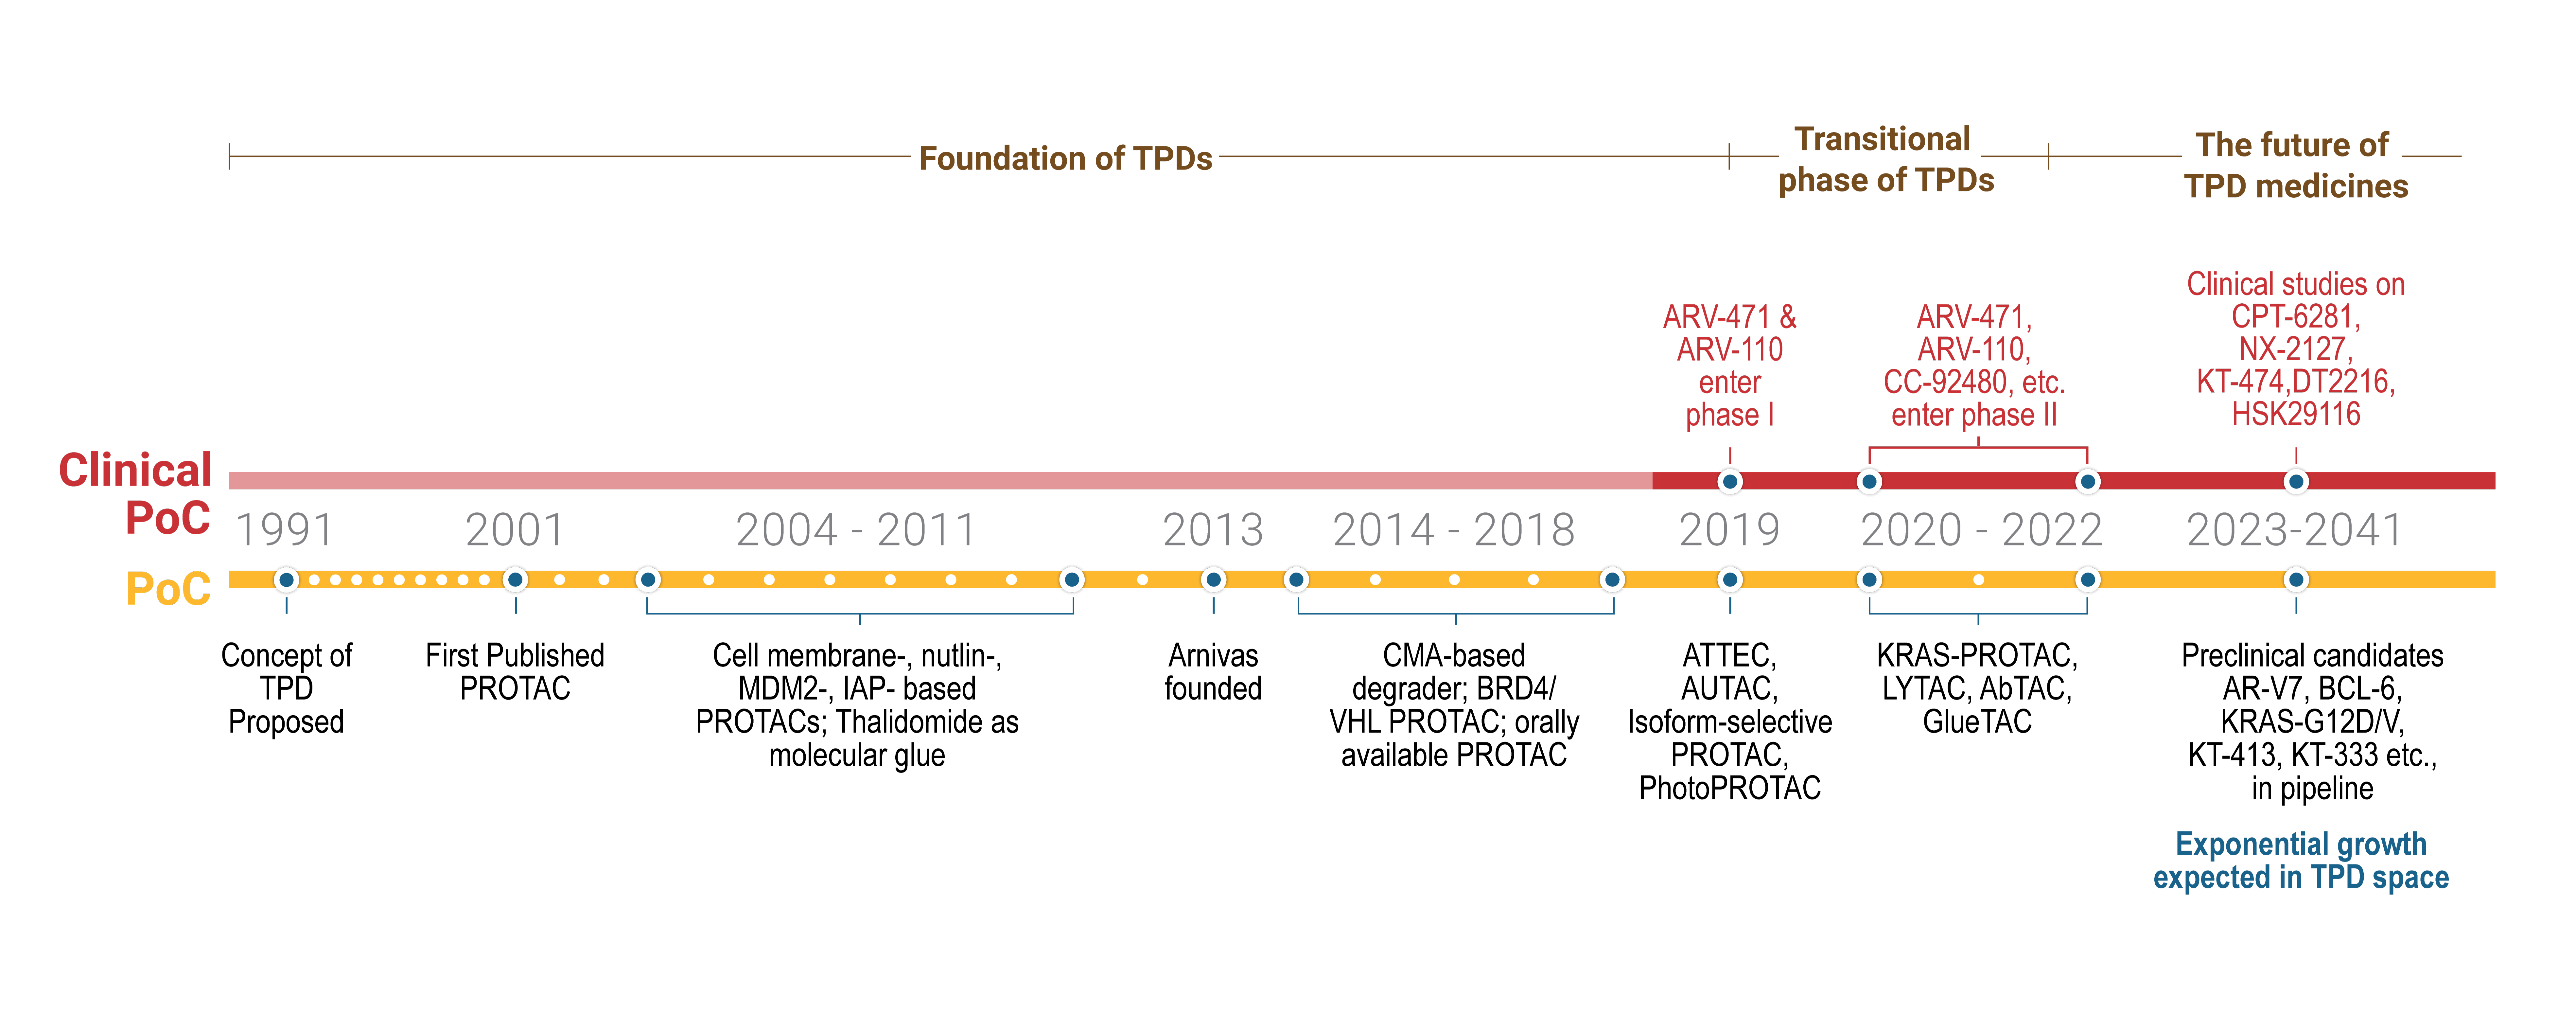 Figure 2: Timeline of TPD discoveries